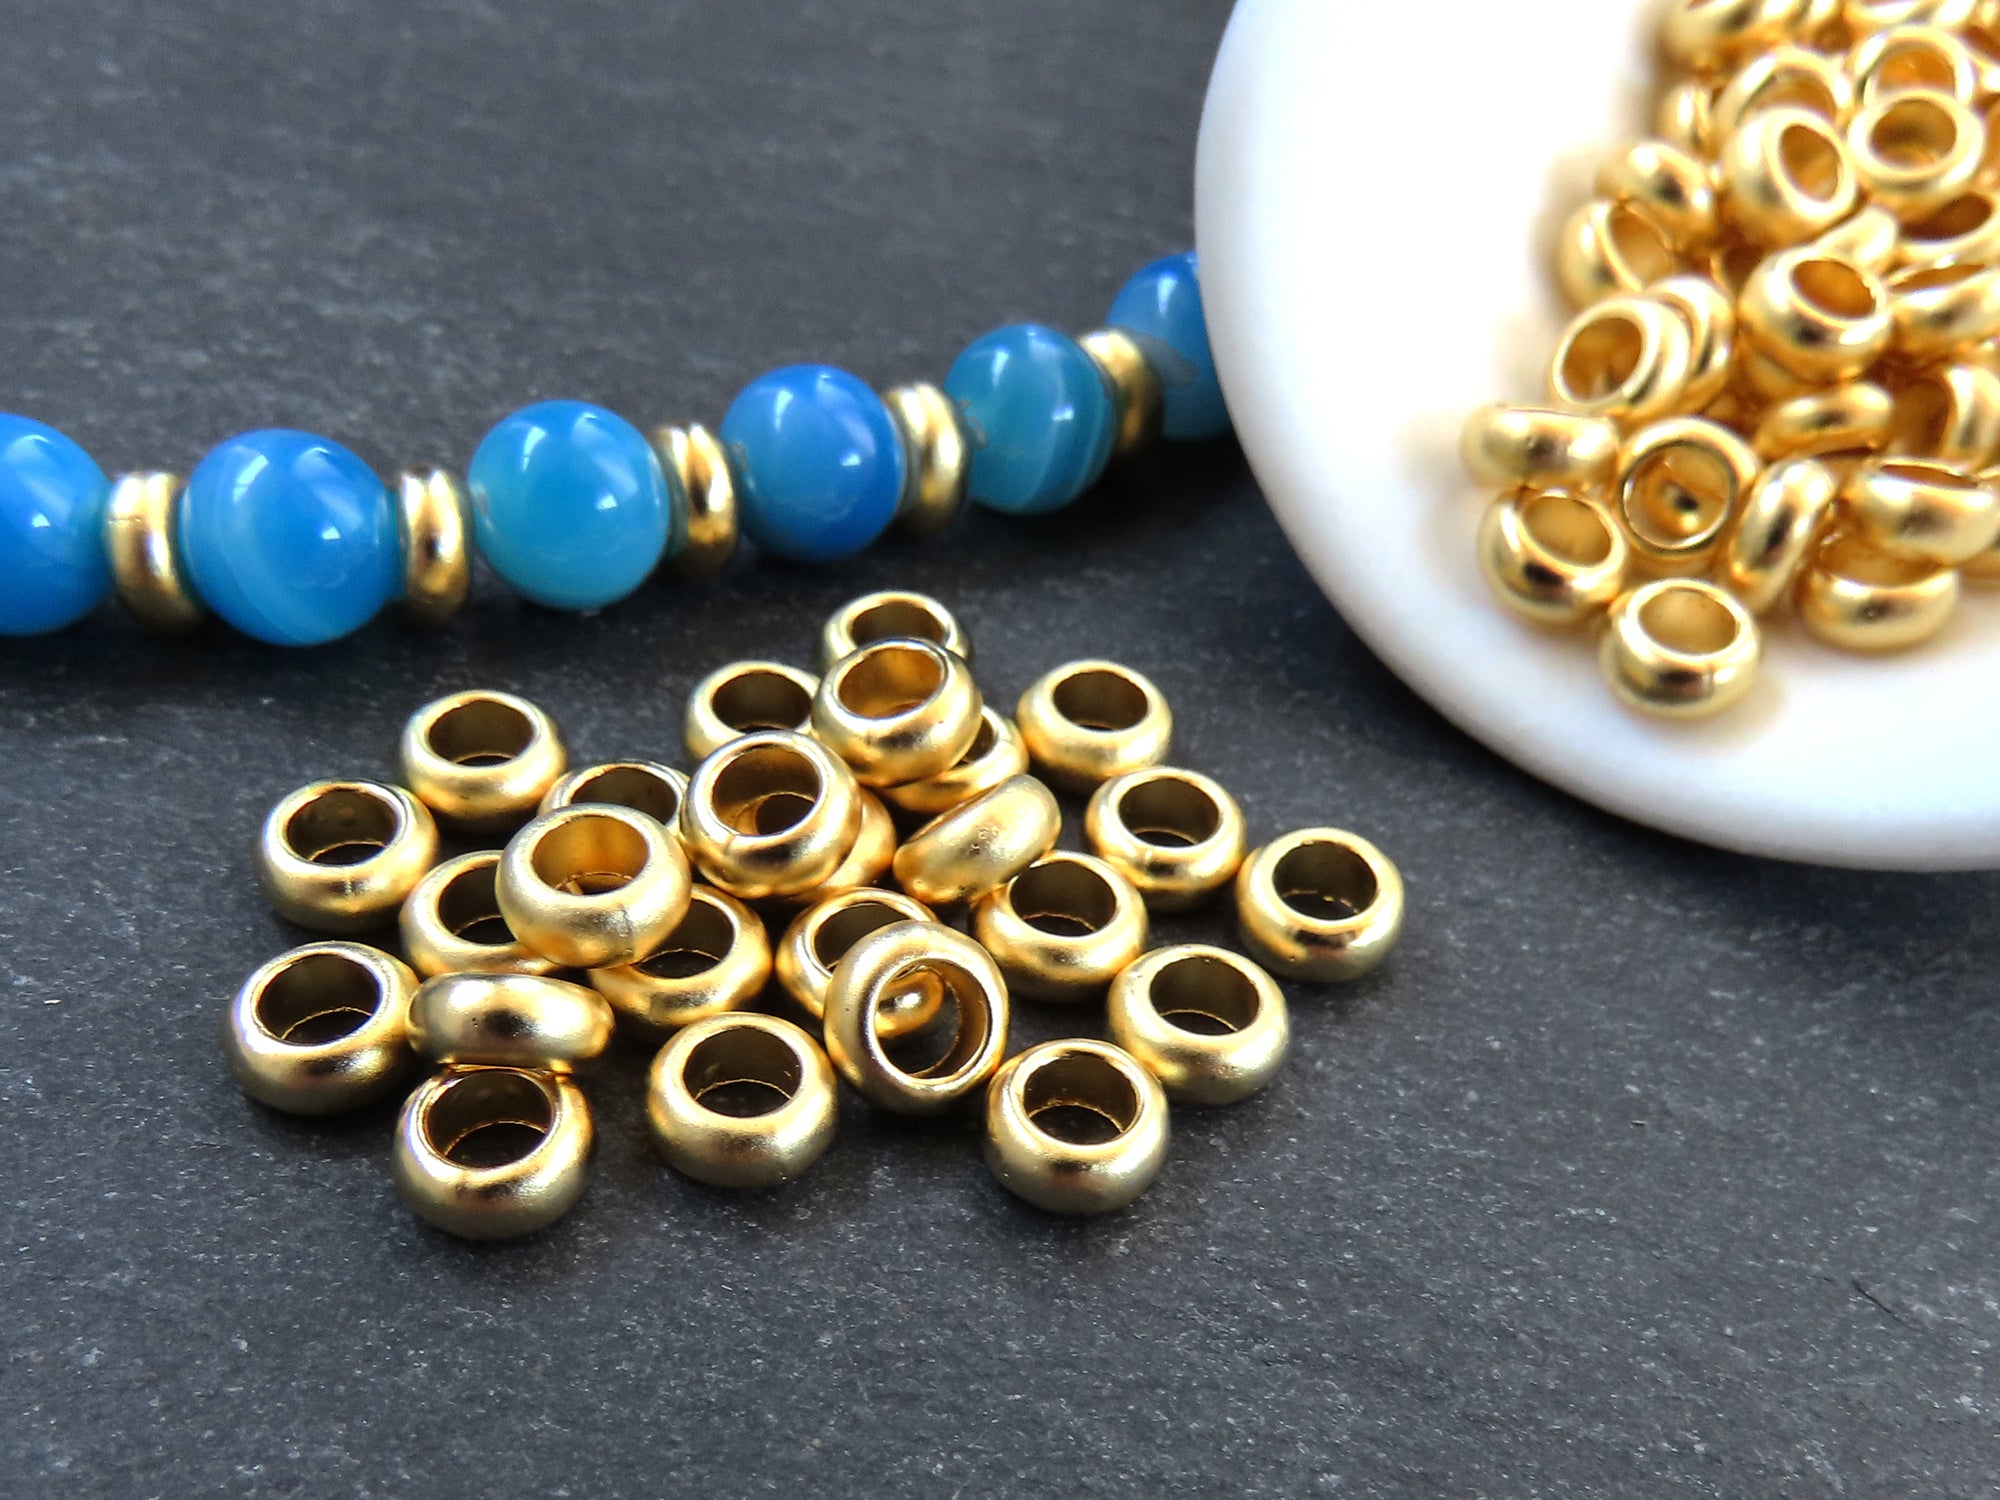 6mm Heishi Washer Bead Spacers, Mykonos Greek Beads, Round Metal Beads,  3.2mm Hole, Jewelry Making Supply, 22k Matte Gold Plated, 20pc